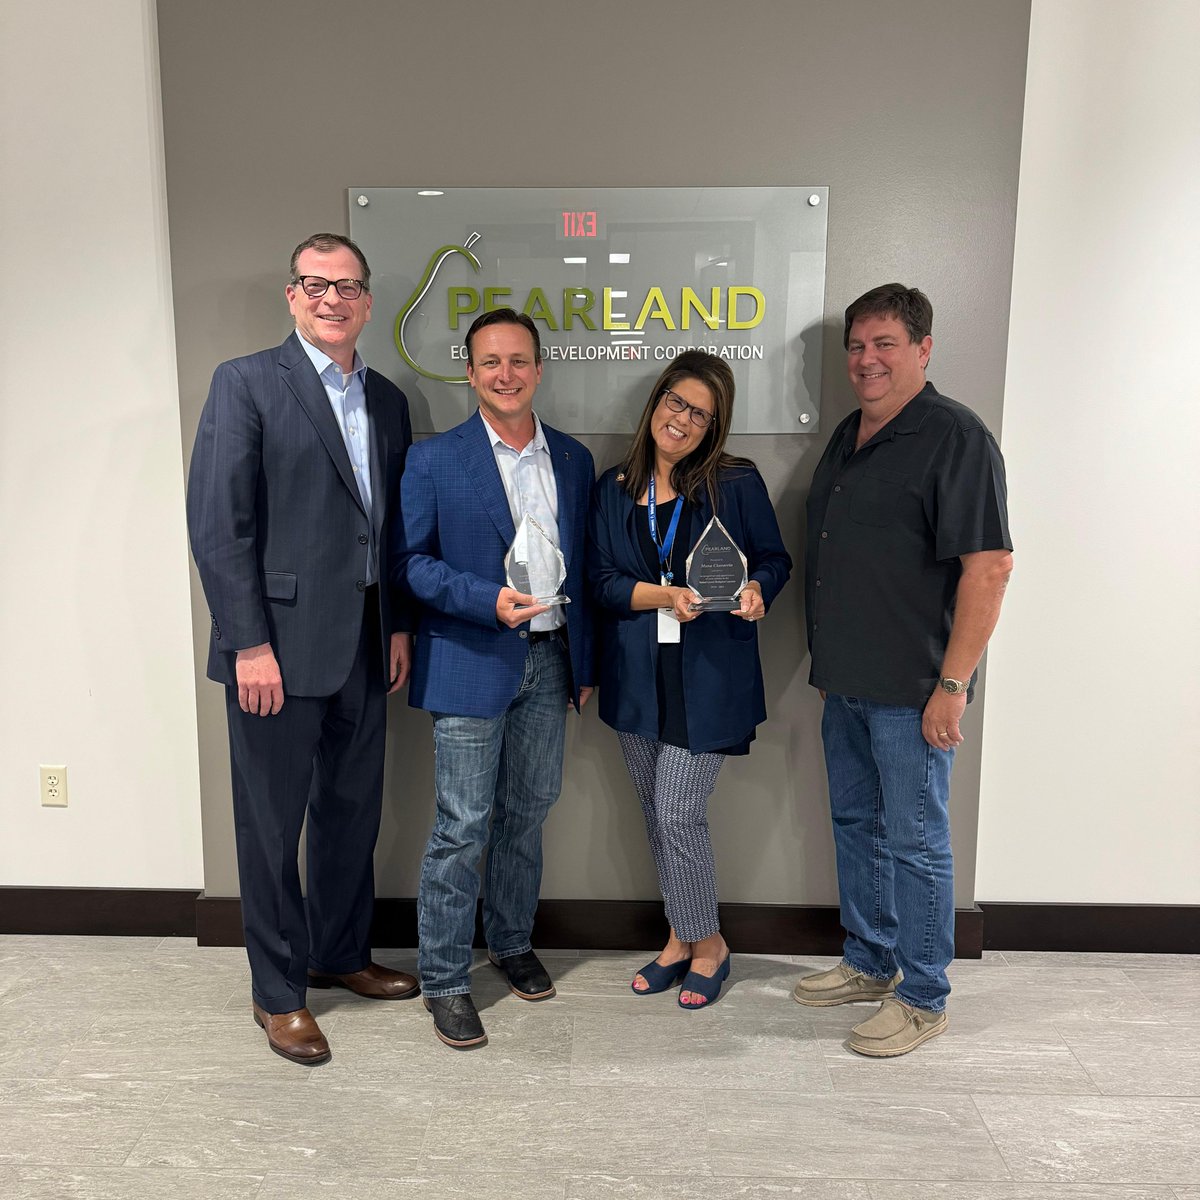 The PEDC Board of Directors recognized Mona Chavarria and Chad Thumann at its board meeting tonight. Mona served on the board from '14-'23. Chad served on the PEDC Board from '18-'23. Thank you both for your service on the PEDC board!